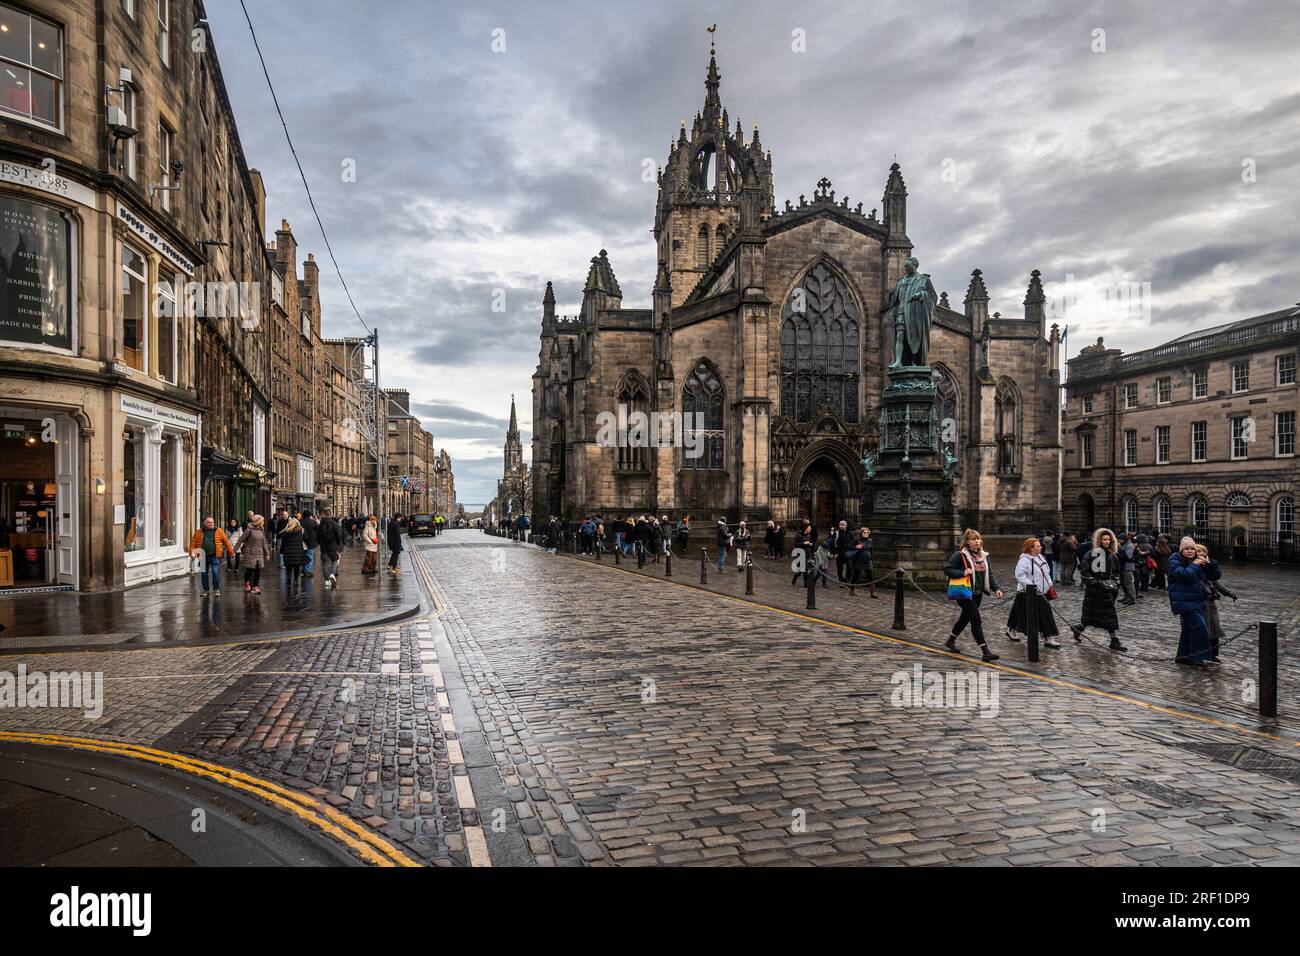 View Edinburgh’s Royal Mile, the most famous street of the city, with the St Giles Cathedral on the right. Edinburgh, Scotland, Jan. 2023. Stock Photo